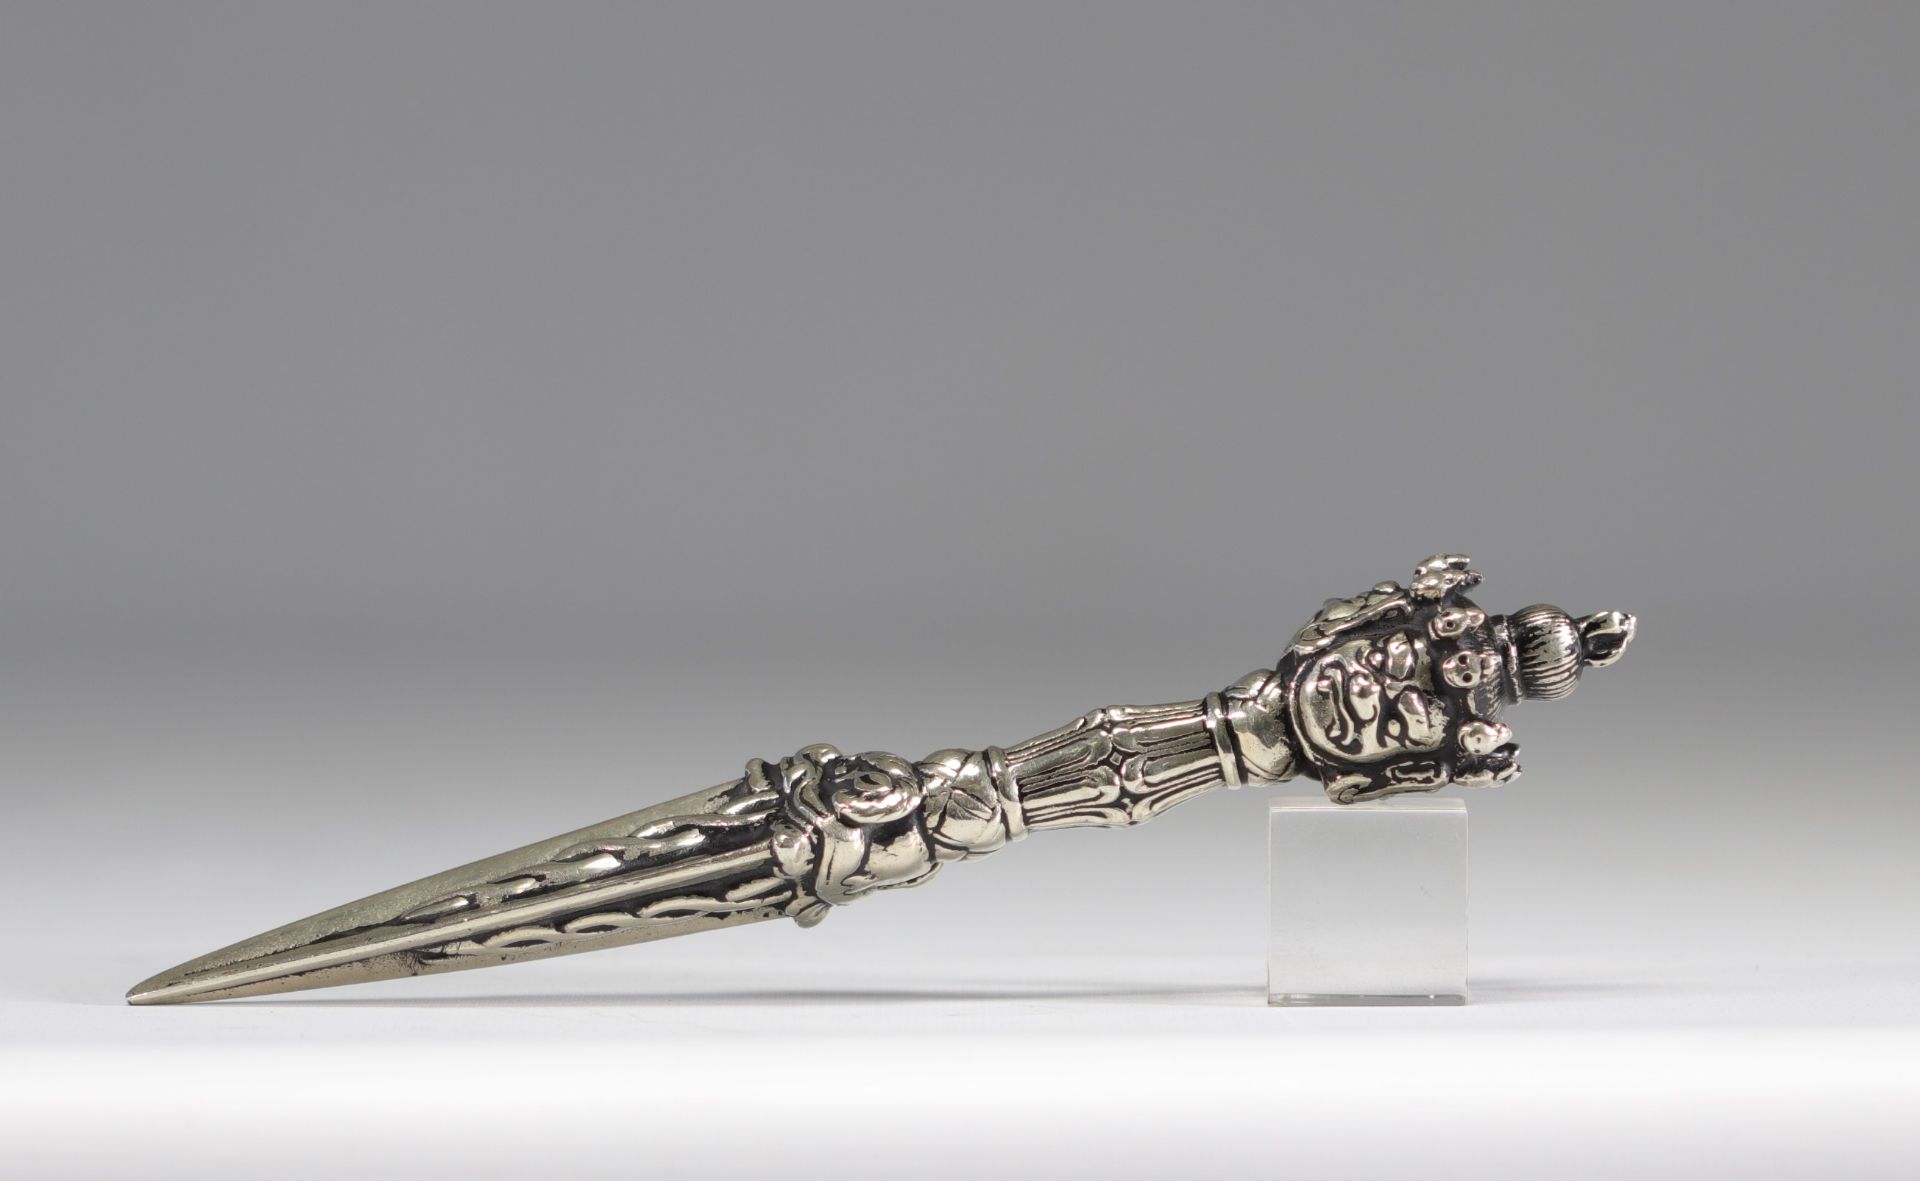 Solid silver Phurbu ritual dagger from China and Tibet - Image 2 of 3